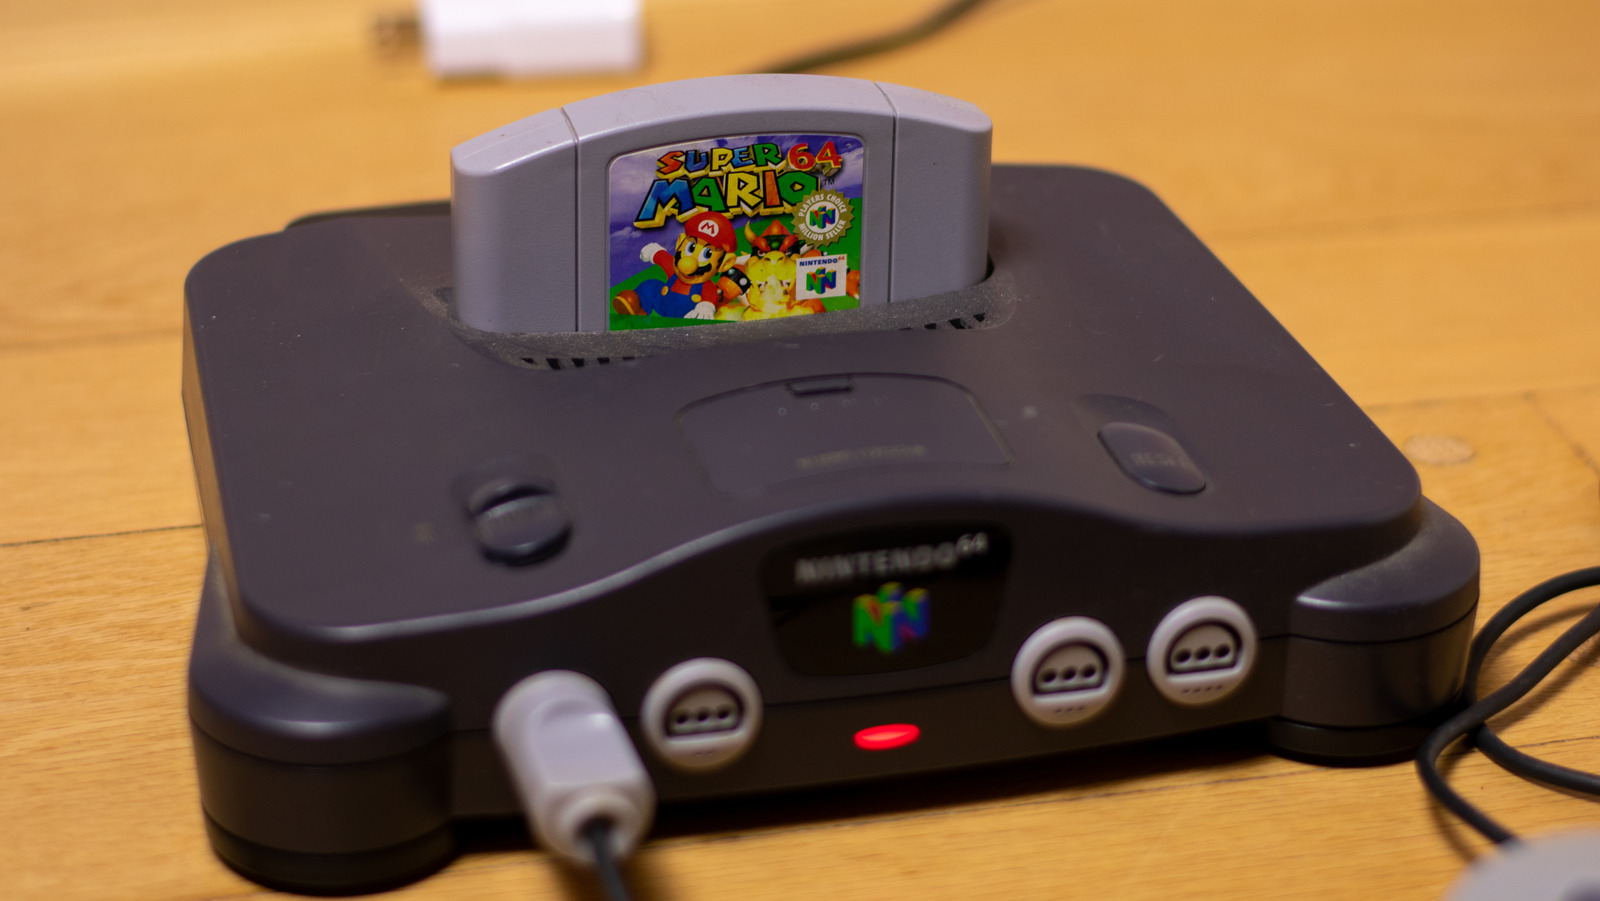 The top-rated video game of each year since Super Mario 64